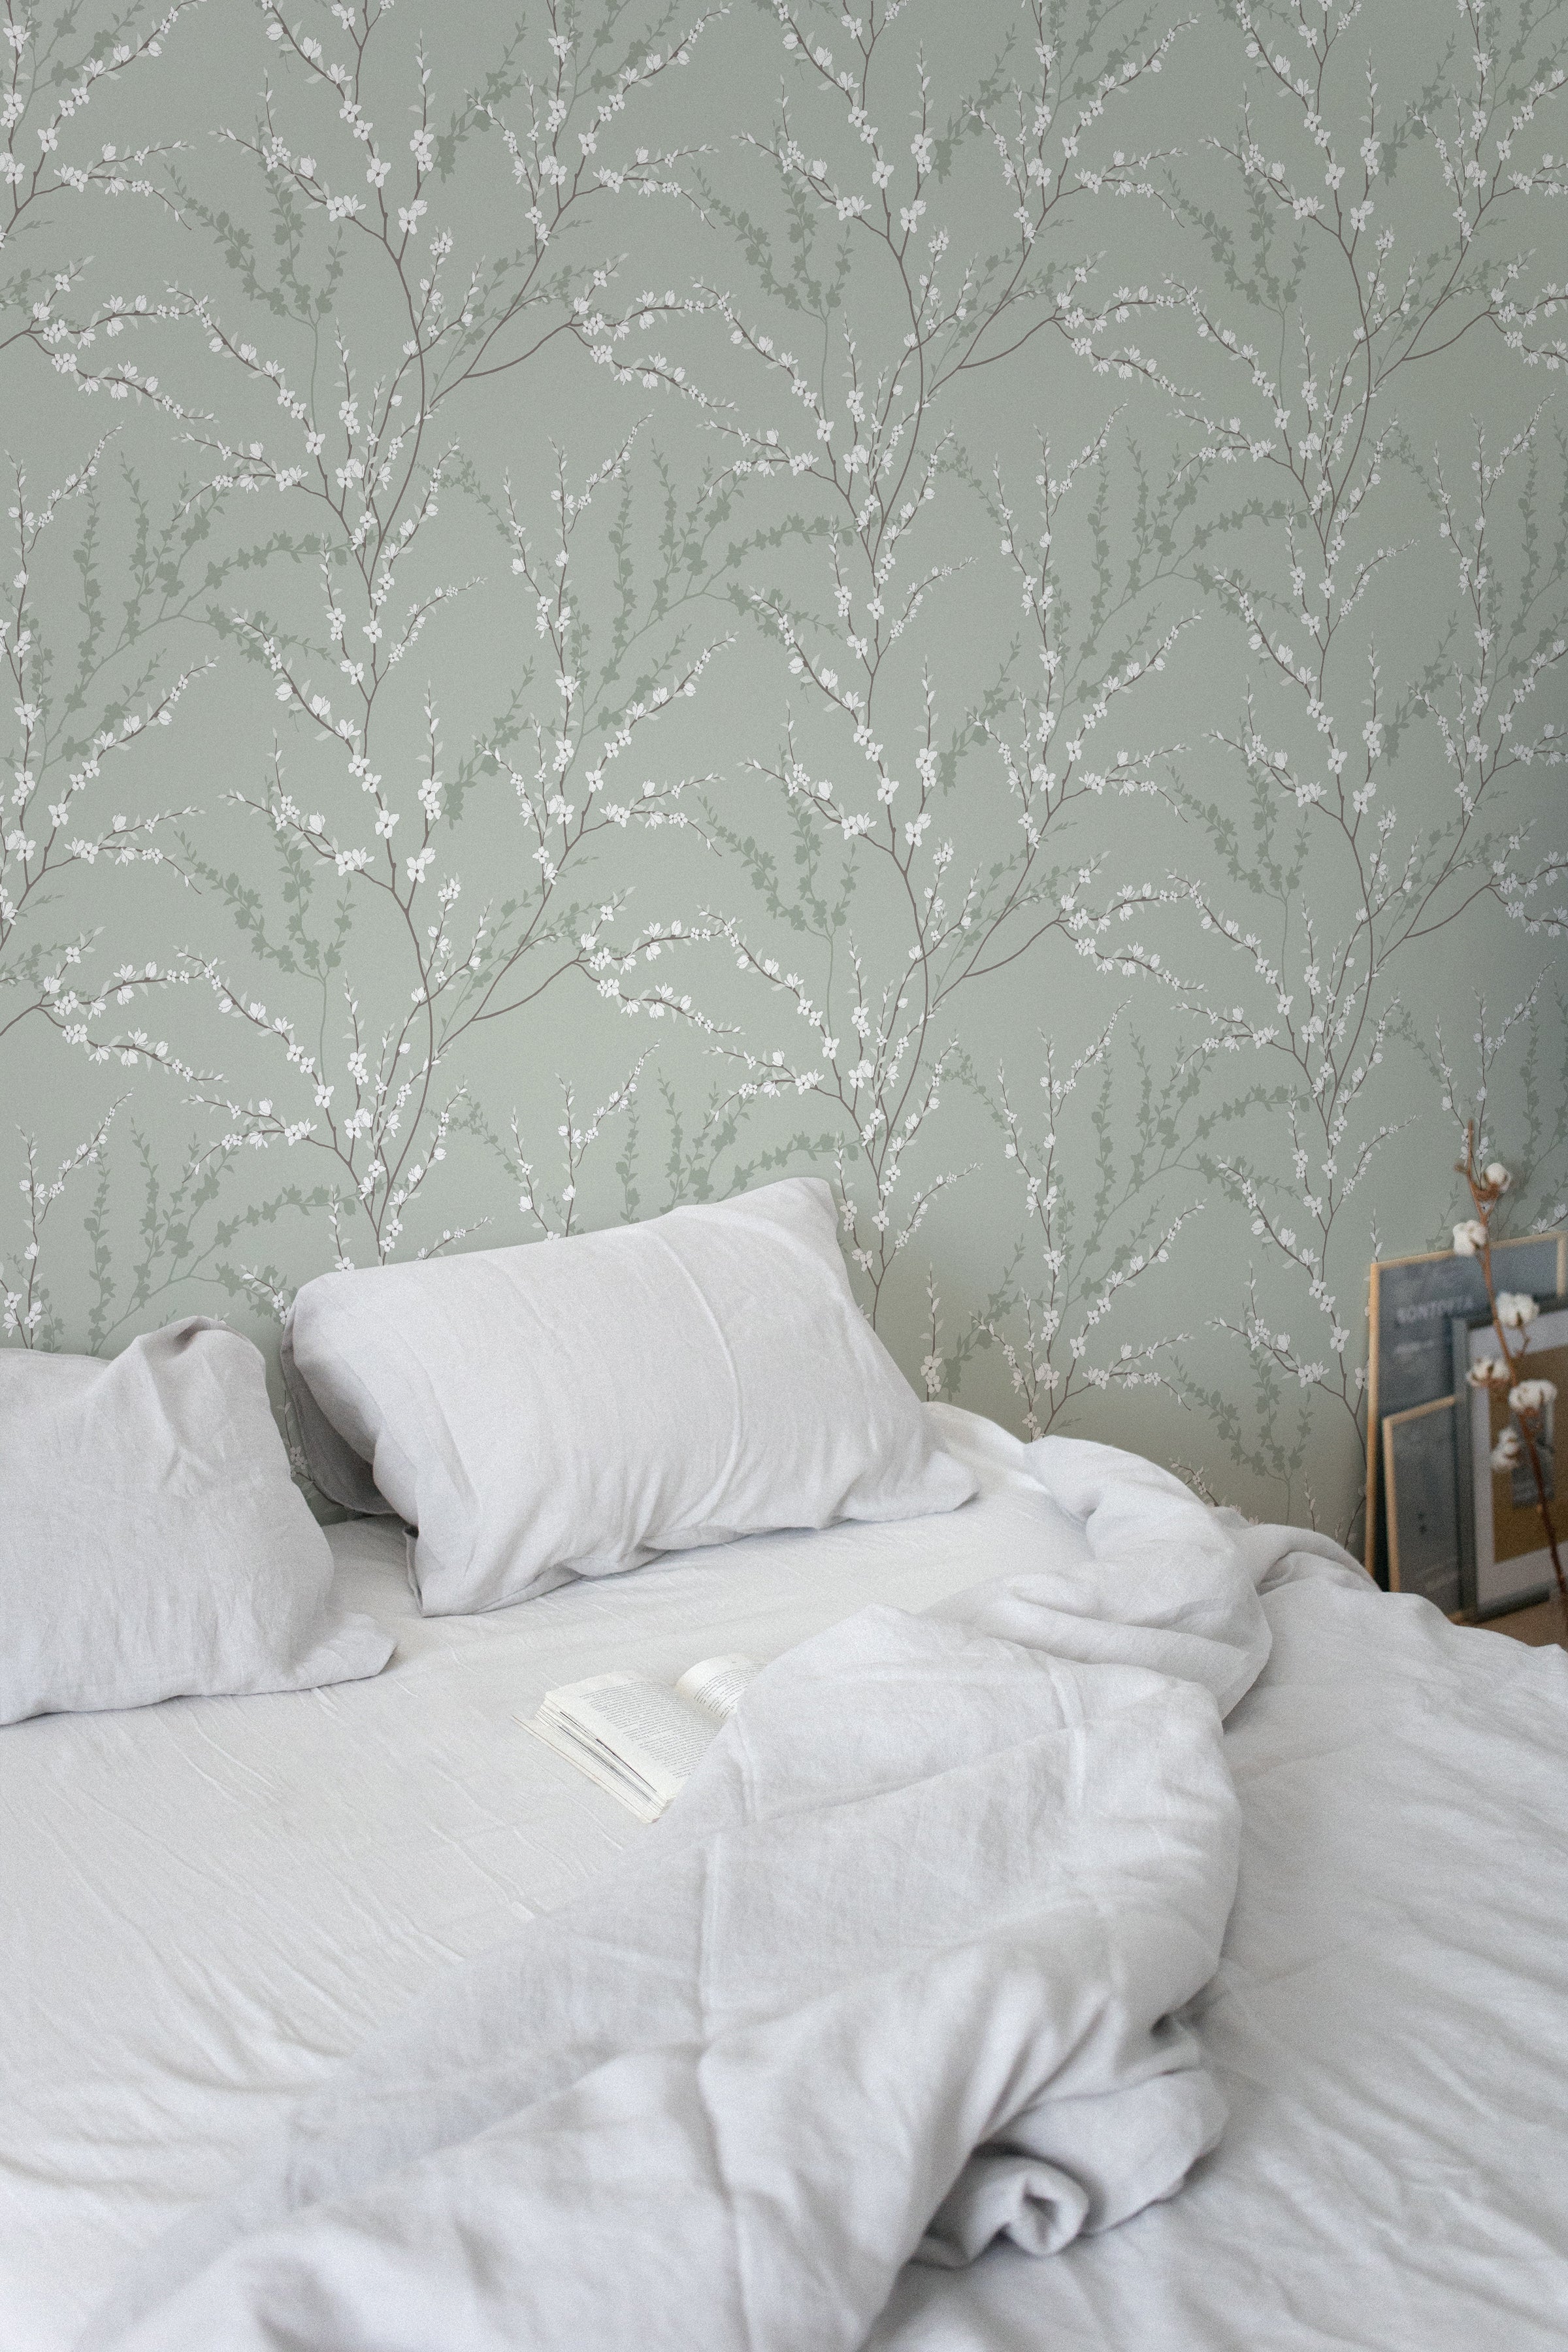 The Enchanted Blossoms Wallpaper close-up showcases the intricate detailing of white floral patterns and soft green foliage on a muted background, imparting a calming and elegant botanical aesthetic to the room.